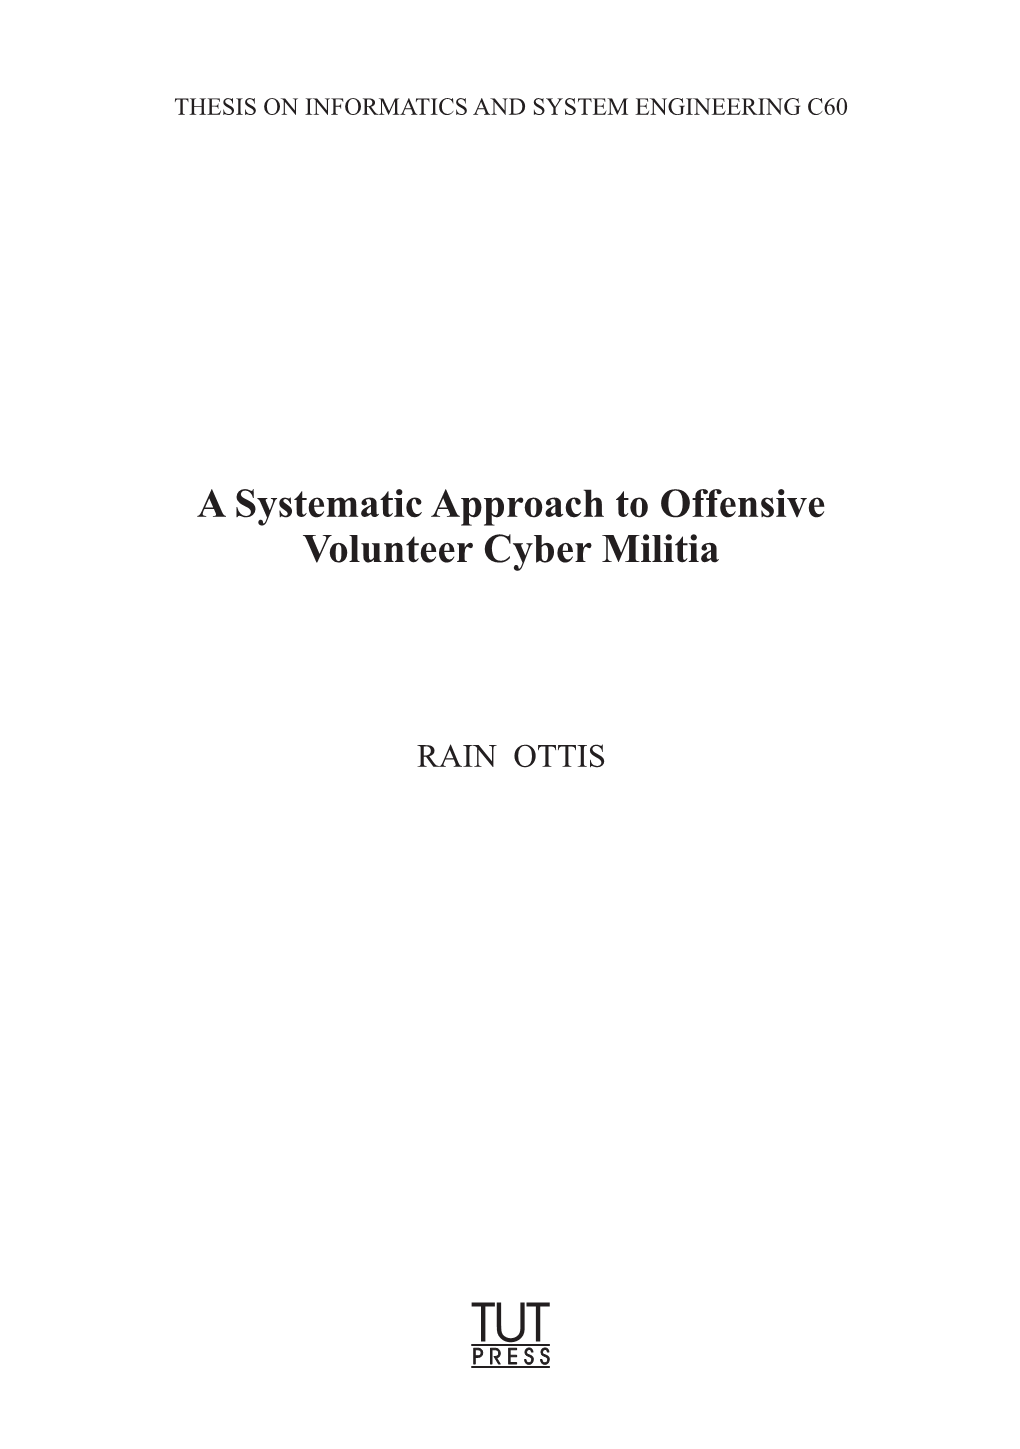 A Systematic Approach to Offensive Volunteer Cyber Militia